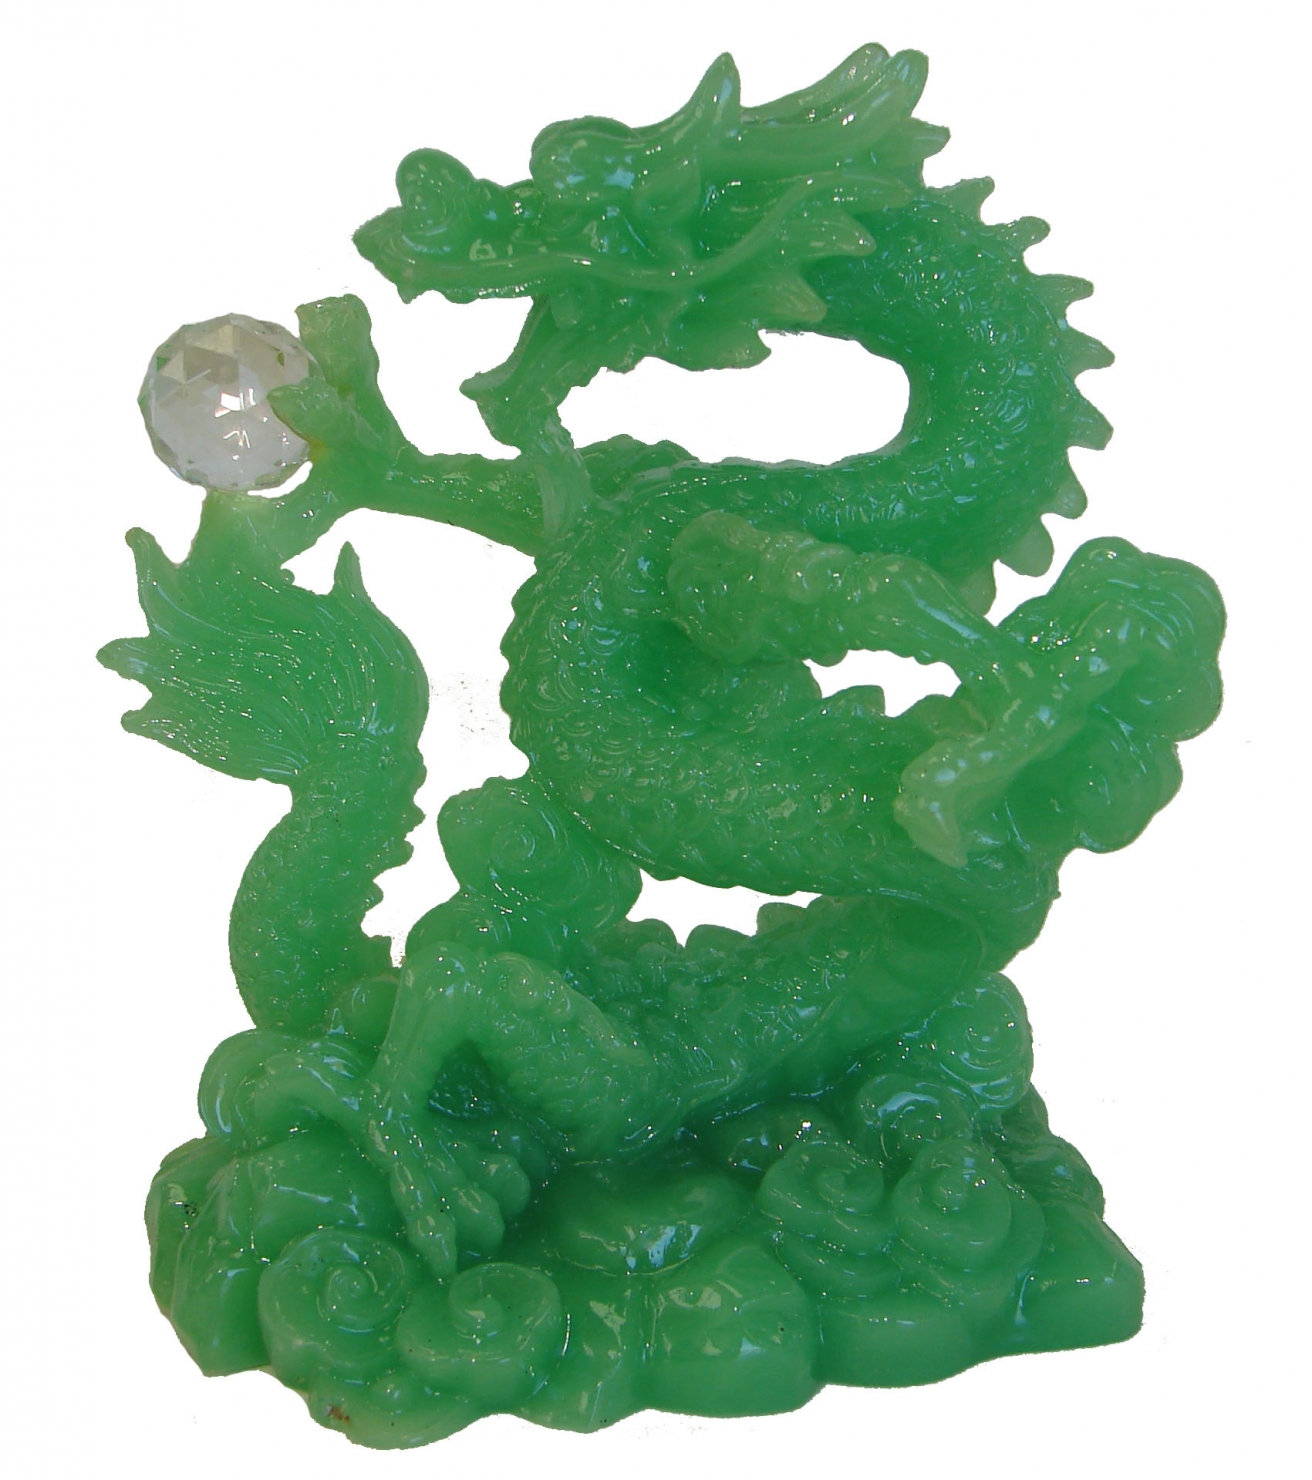 Chinese Green Dragon Holding a Crystal Ball1312 x 1480